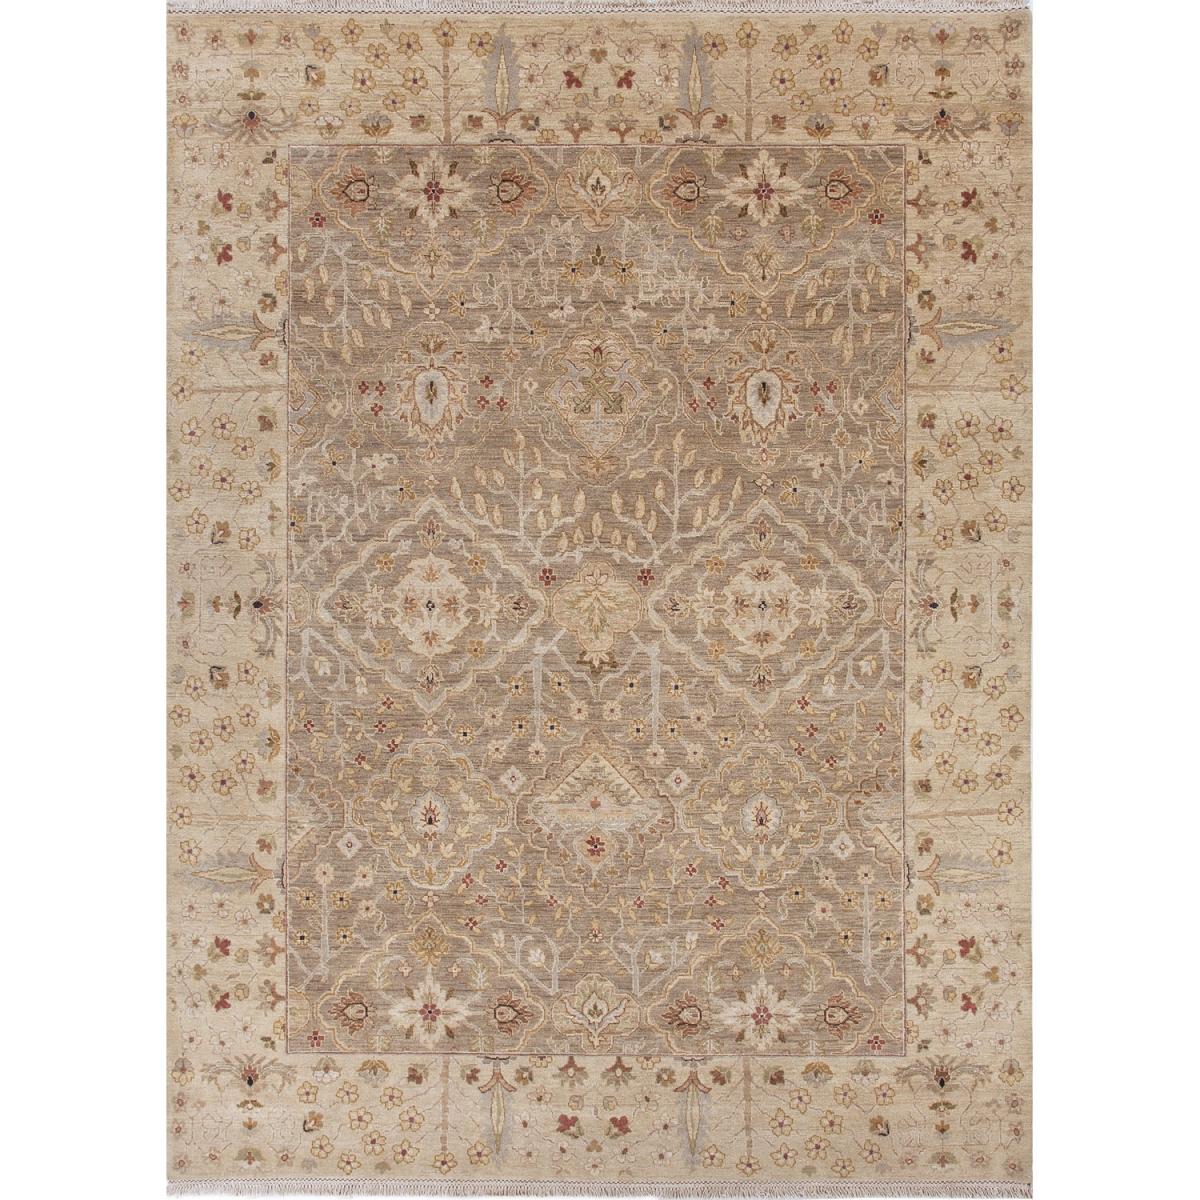 Rug103300 2 X 3 Ft. Opus Allegro Hand-knotted Floral Cream & Maroon Area Rug